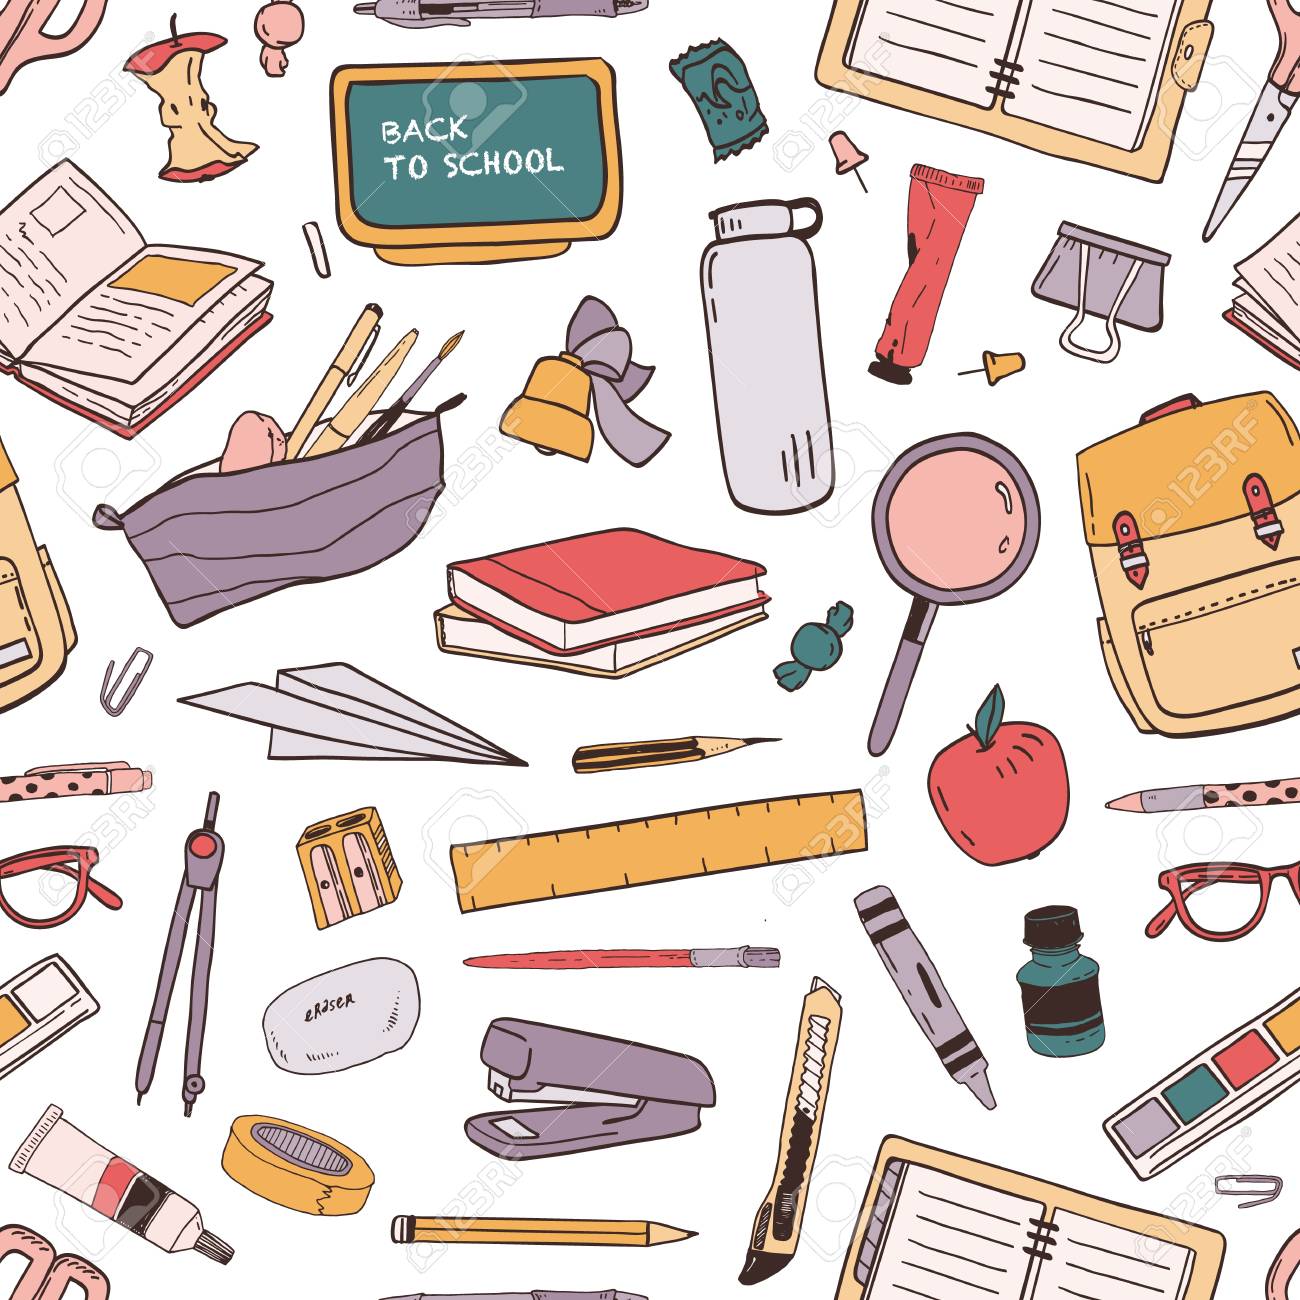 School kawaii background images and wallpapers â yl computing